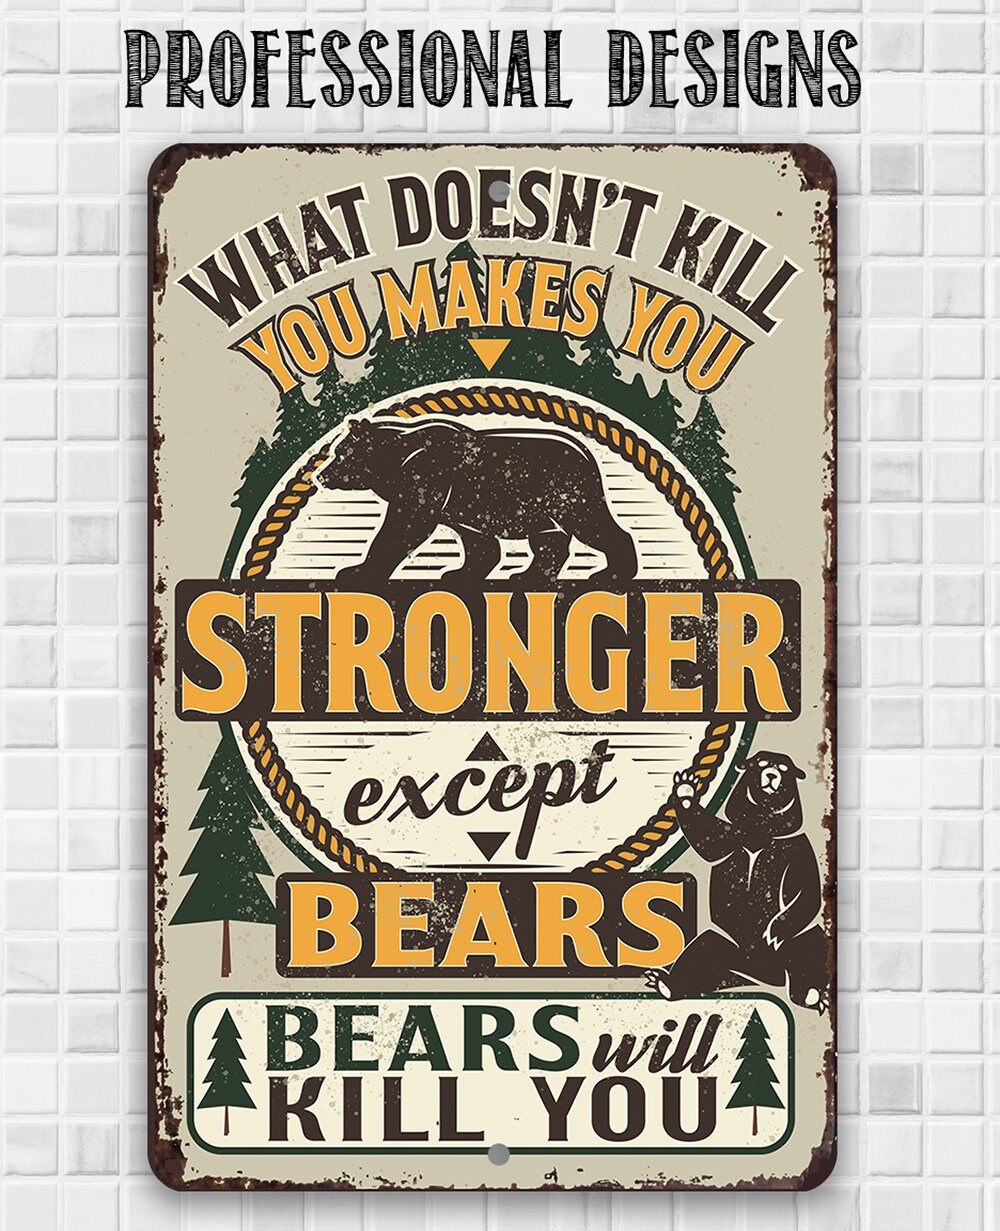 What Doesn't Kill You Makes You Stronger Except Bears - Metal Sign